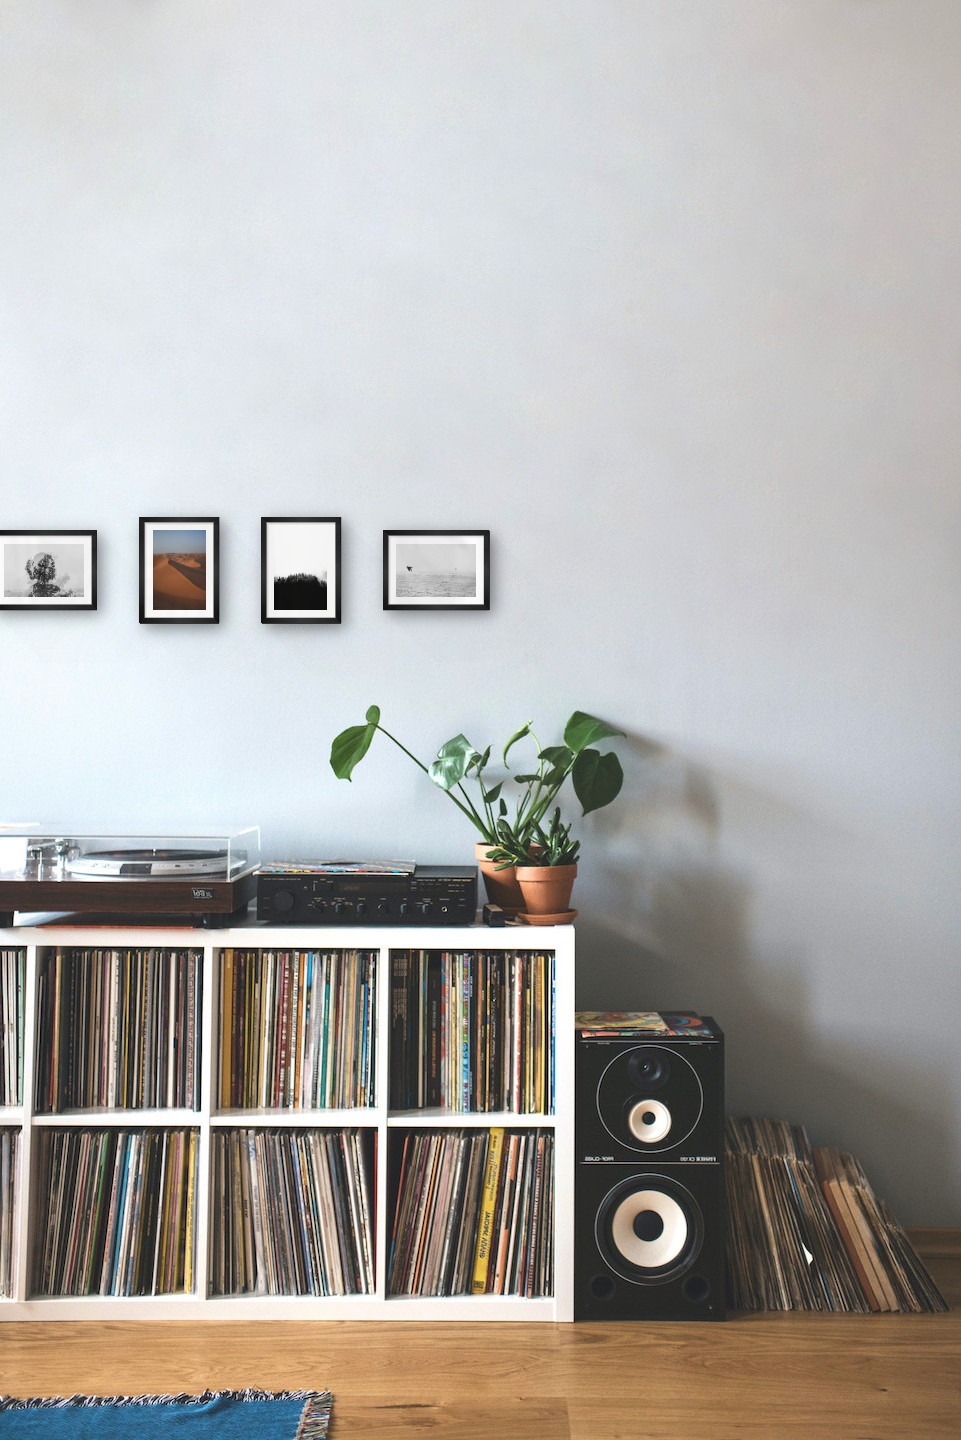 Gallery wall with picture frames in black in sizes 13x18 with prints "Trees and silhouette", "Desert", "Wooden tops and fog" and "Birds over the sea"